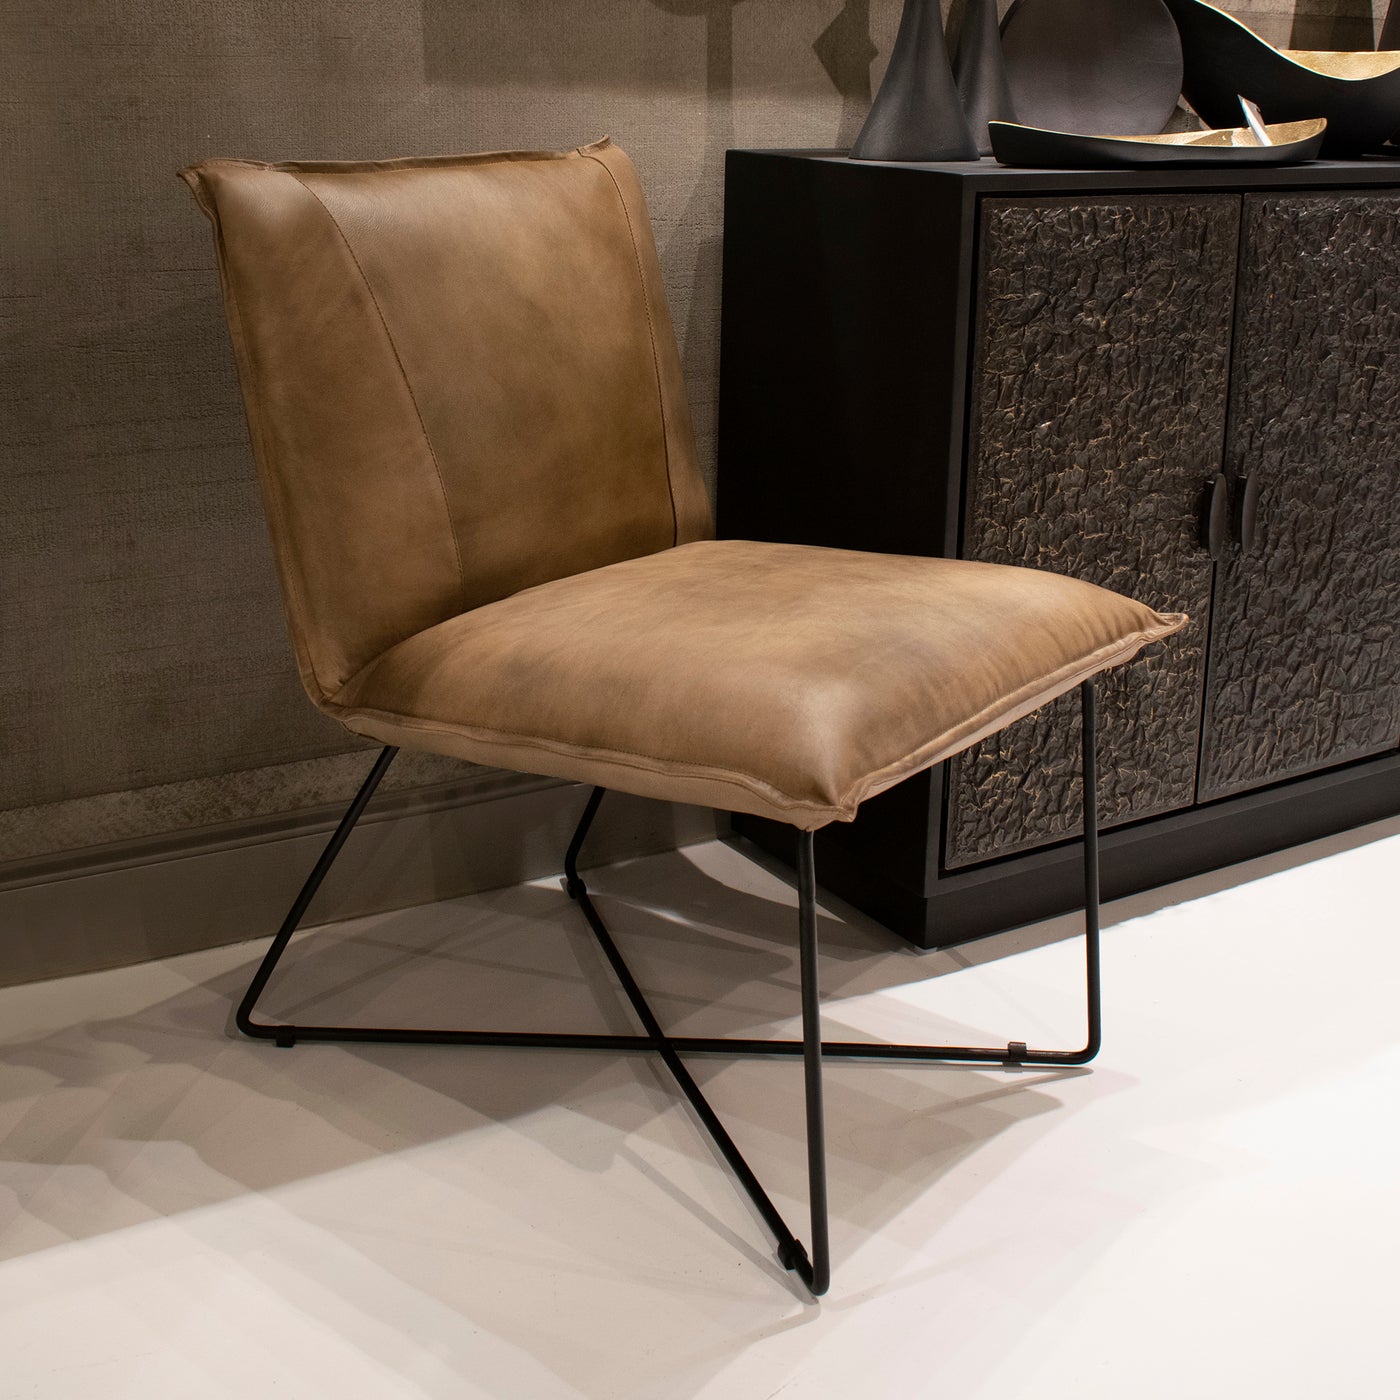 Bevæger sig ikke frynser Hr Neeko Leather Chair - leather chairs | The Howard Elliott Collection